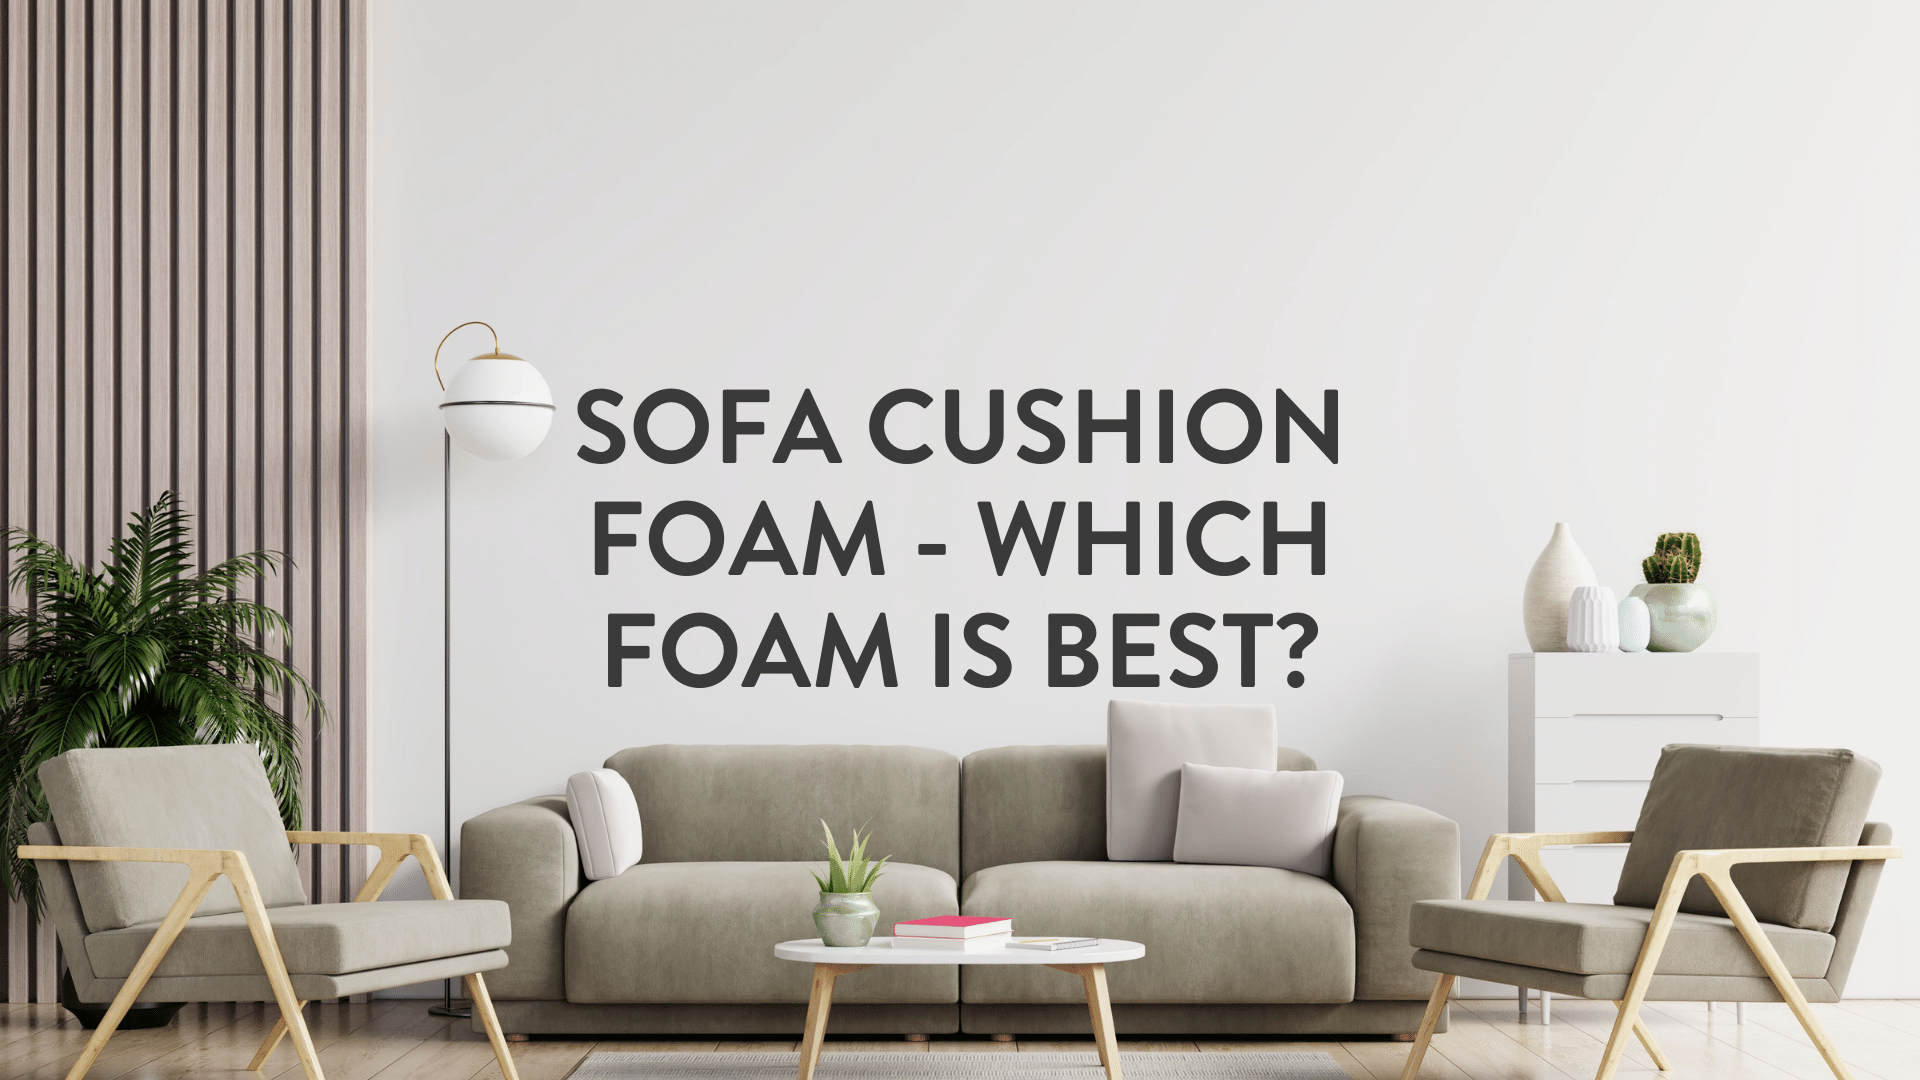 types of upholstery foam - Google Search  Cushions on sofa, Sofa cushion  foam, Couch cushions